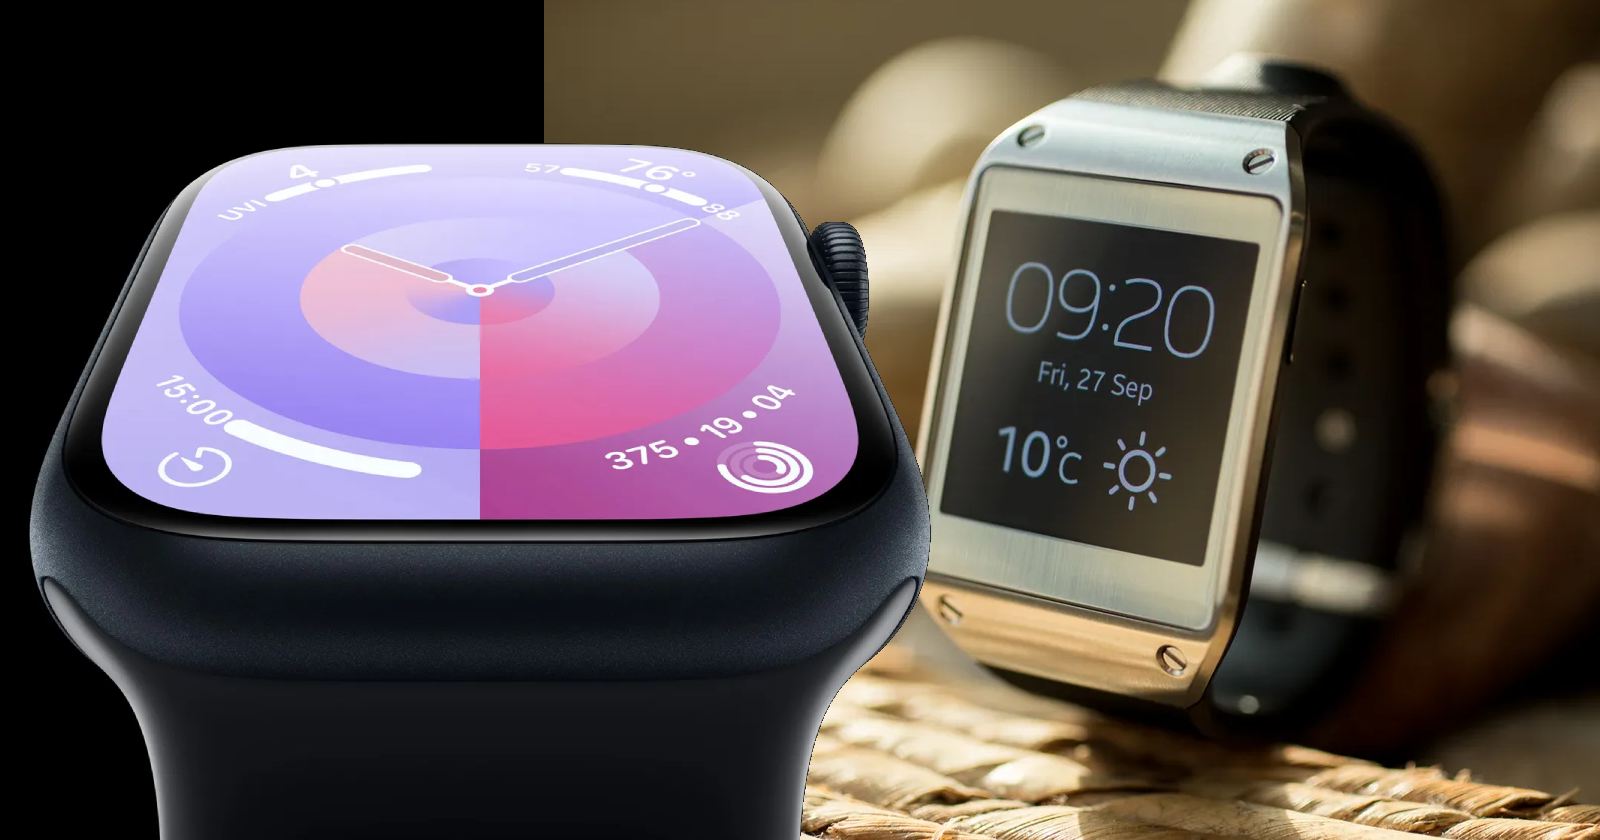 Will the Galaxy Watch be like the Apple Watch with a rectangular design?